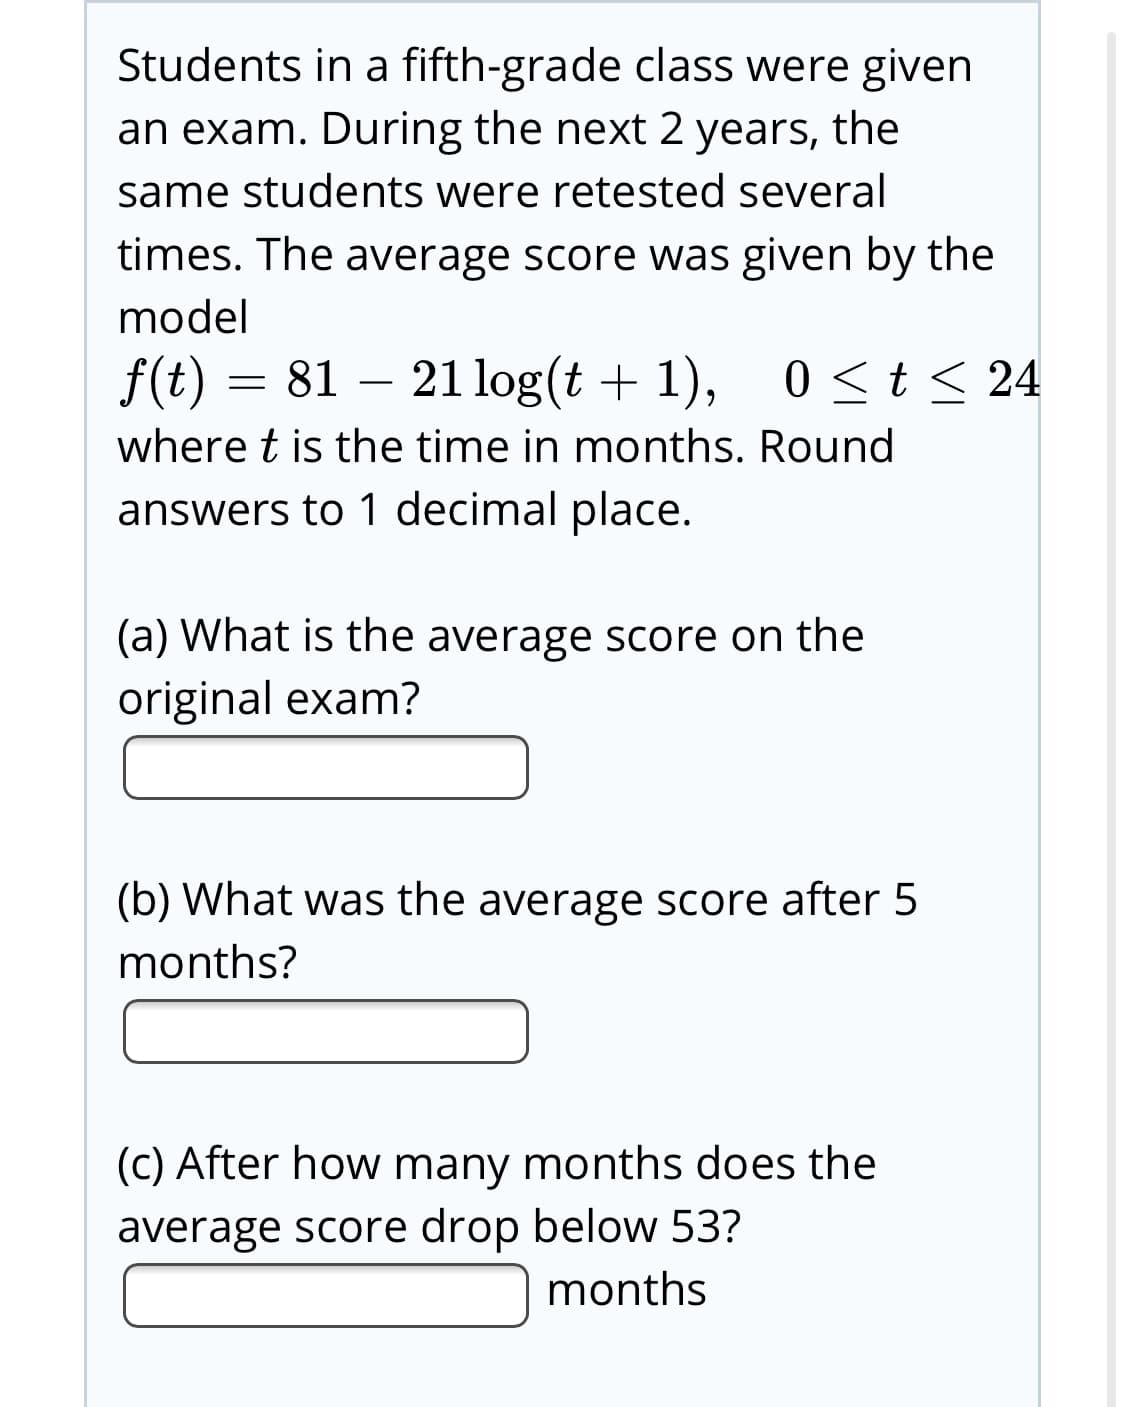 Students in a fifth-grade class were given
an exam. During the next 2 years, the
same students were retested several
times. The average score was given by the
model
f(t) = 81 – 21 log(t + 1),
0<t< 24
where t is the time in months. Round
answers to 1 decimal place.
(a) What is the average score on the
original exam?
(b) What was the average score after 5
months?
(C) After how many months does the
average score drop below 53?
months
